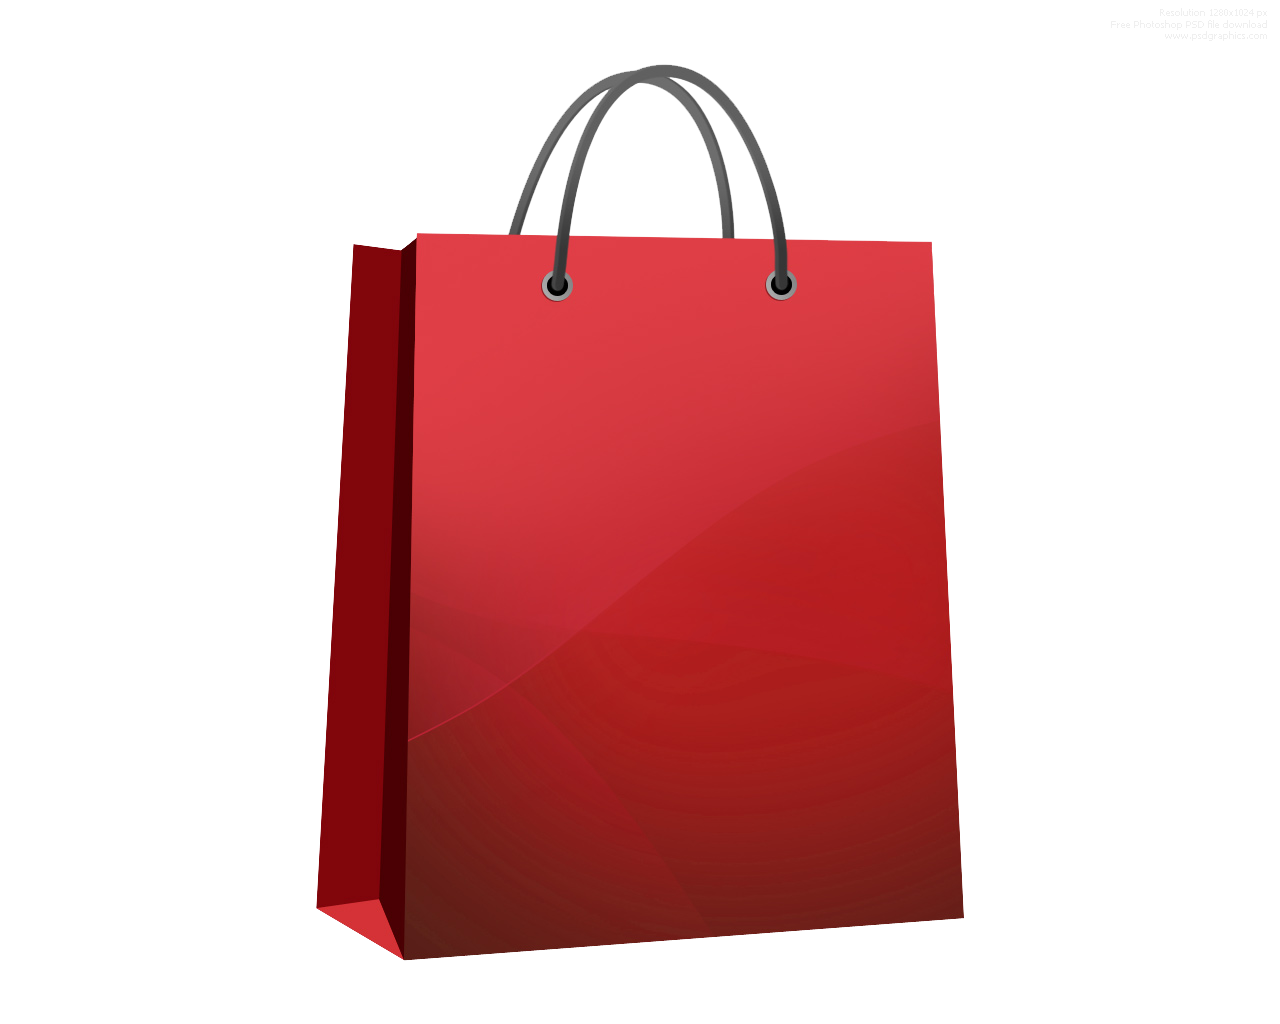 Free Bag Png, Download Free Bag Png png image, Free ClipArts on Clipart Library